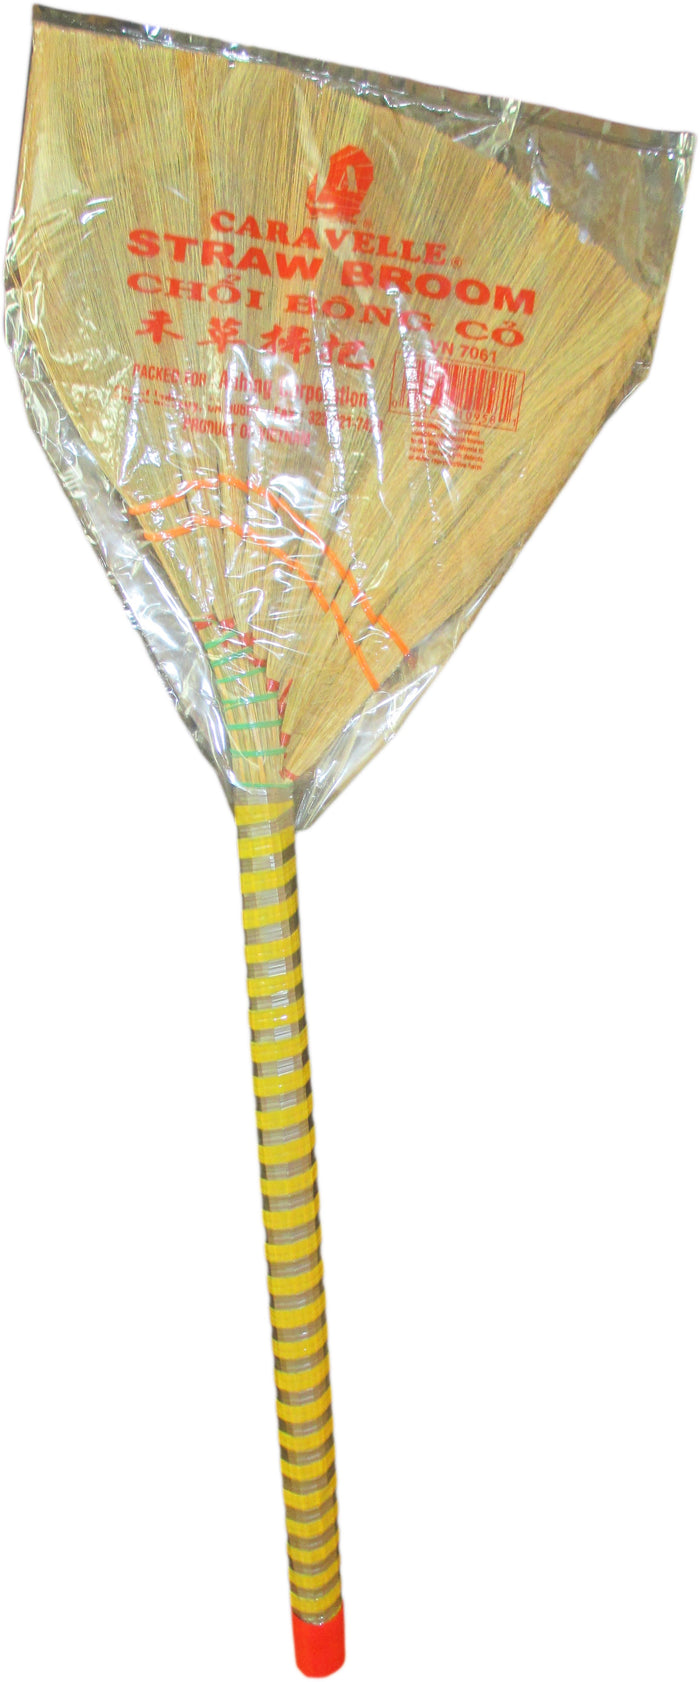 Caravelle - Straw Whisk Broom - 12" Head Width / 37" Overall Length - Asiangrocery2yourdoor